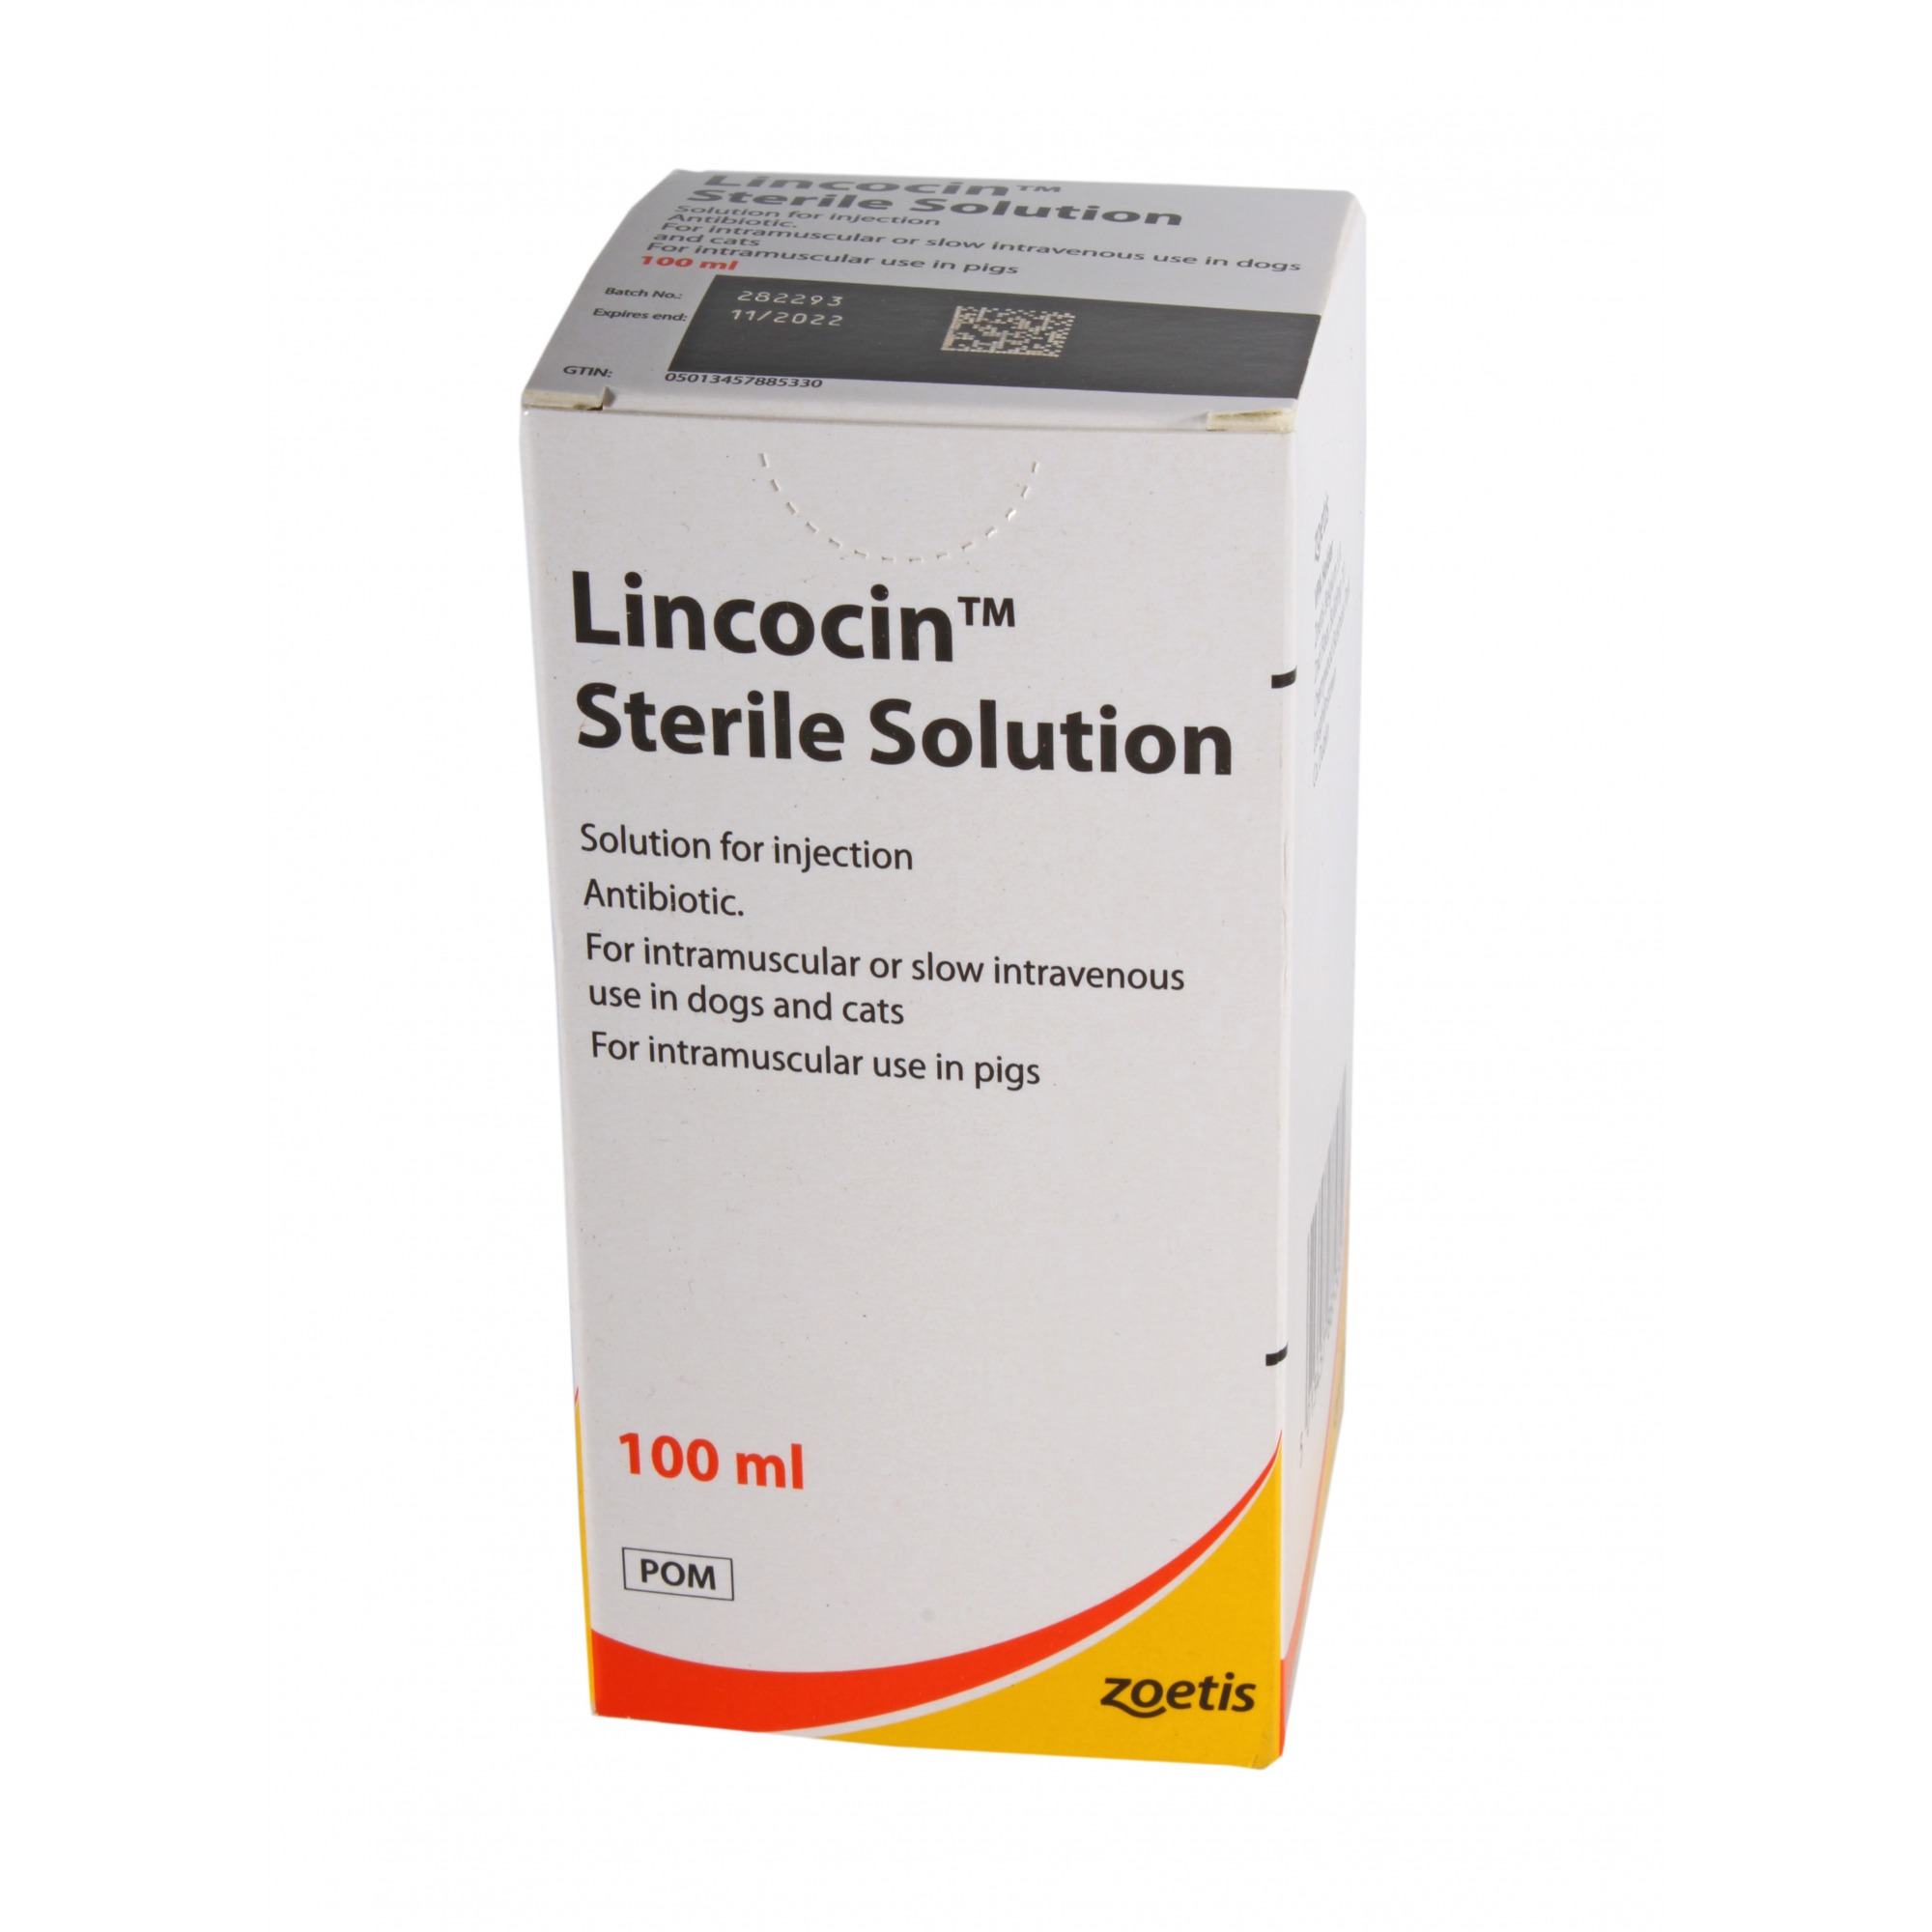 Lincocin Sterile Solution for Injecton